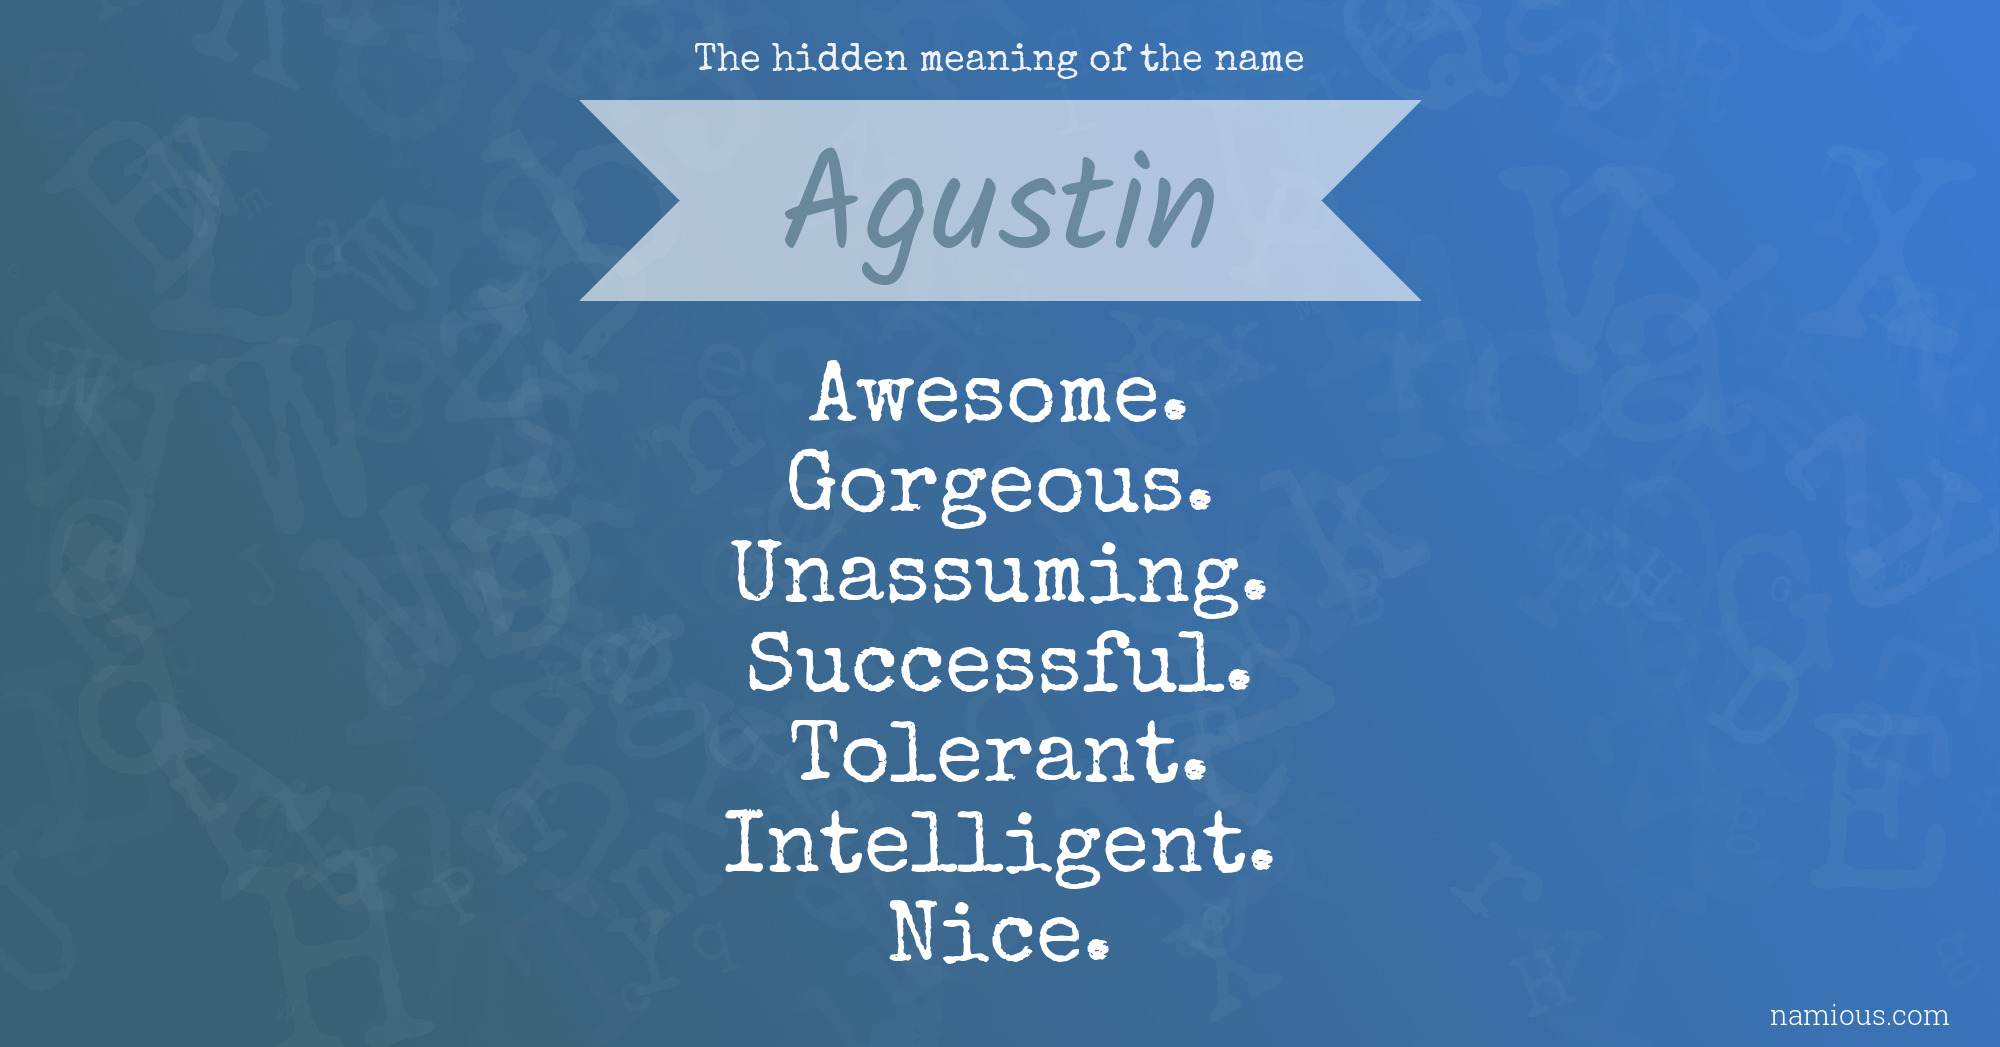 The hidden meaning of the name Agustin